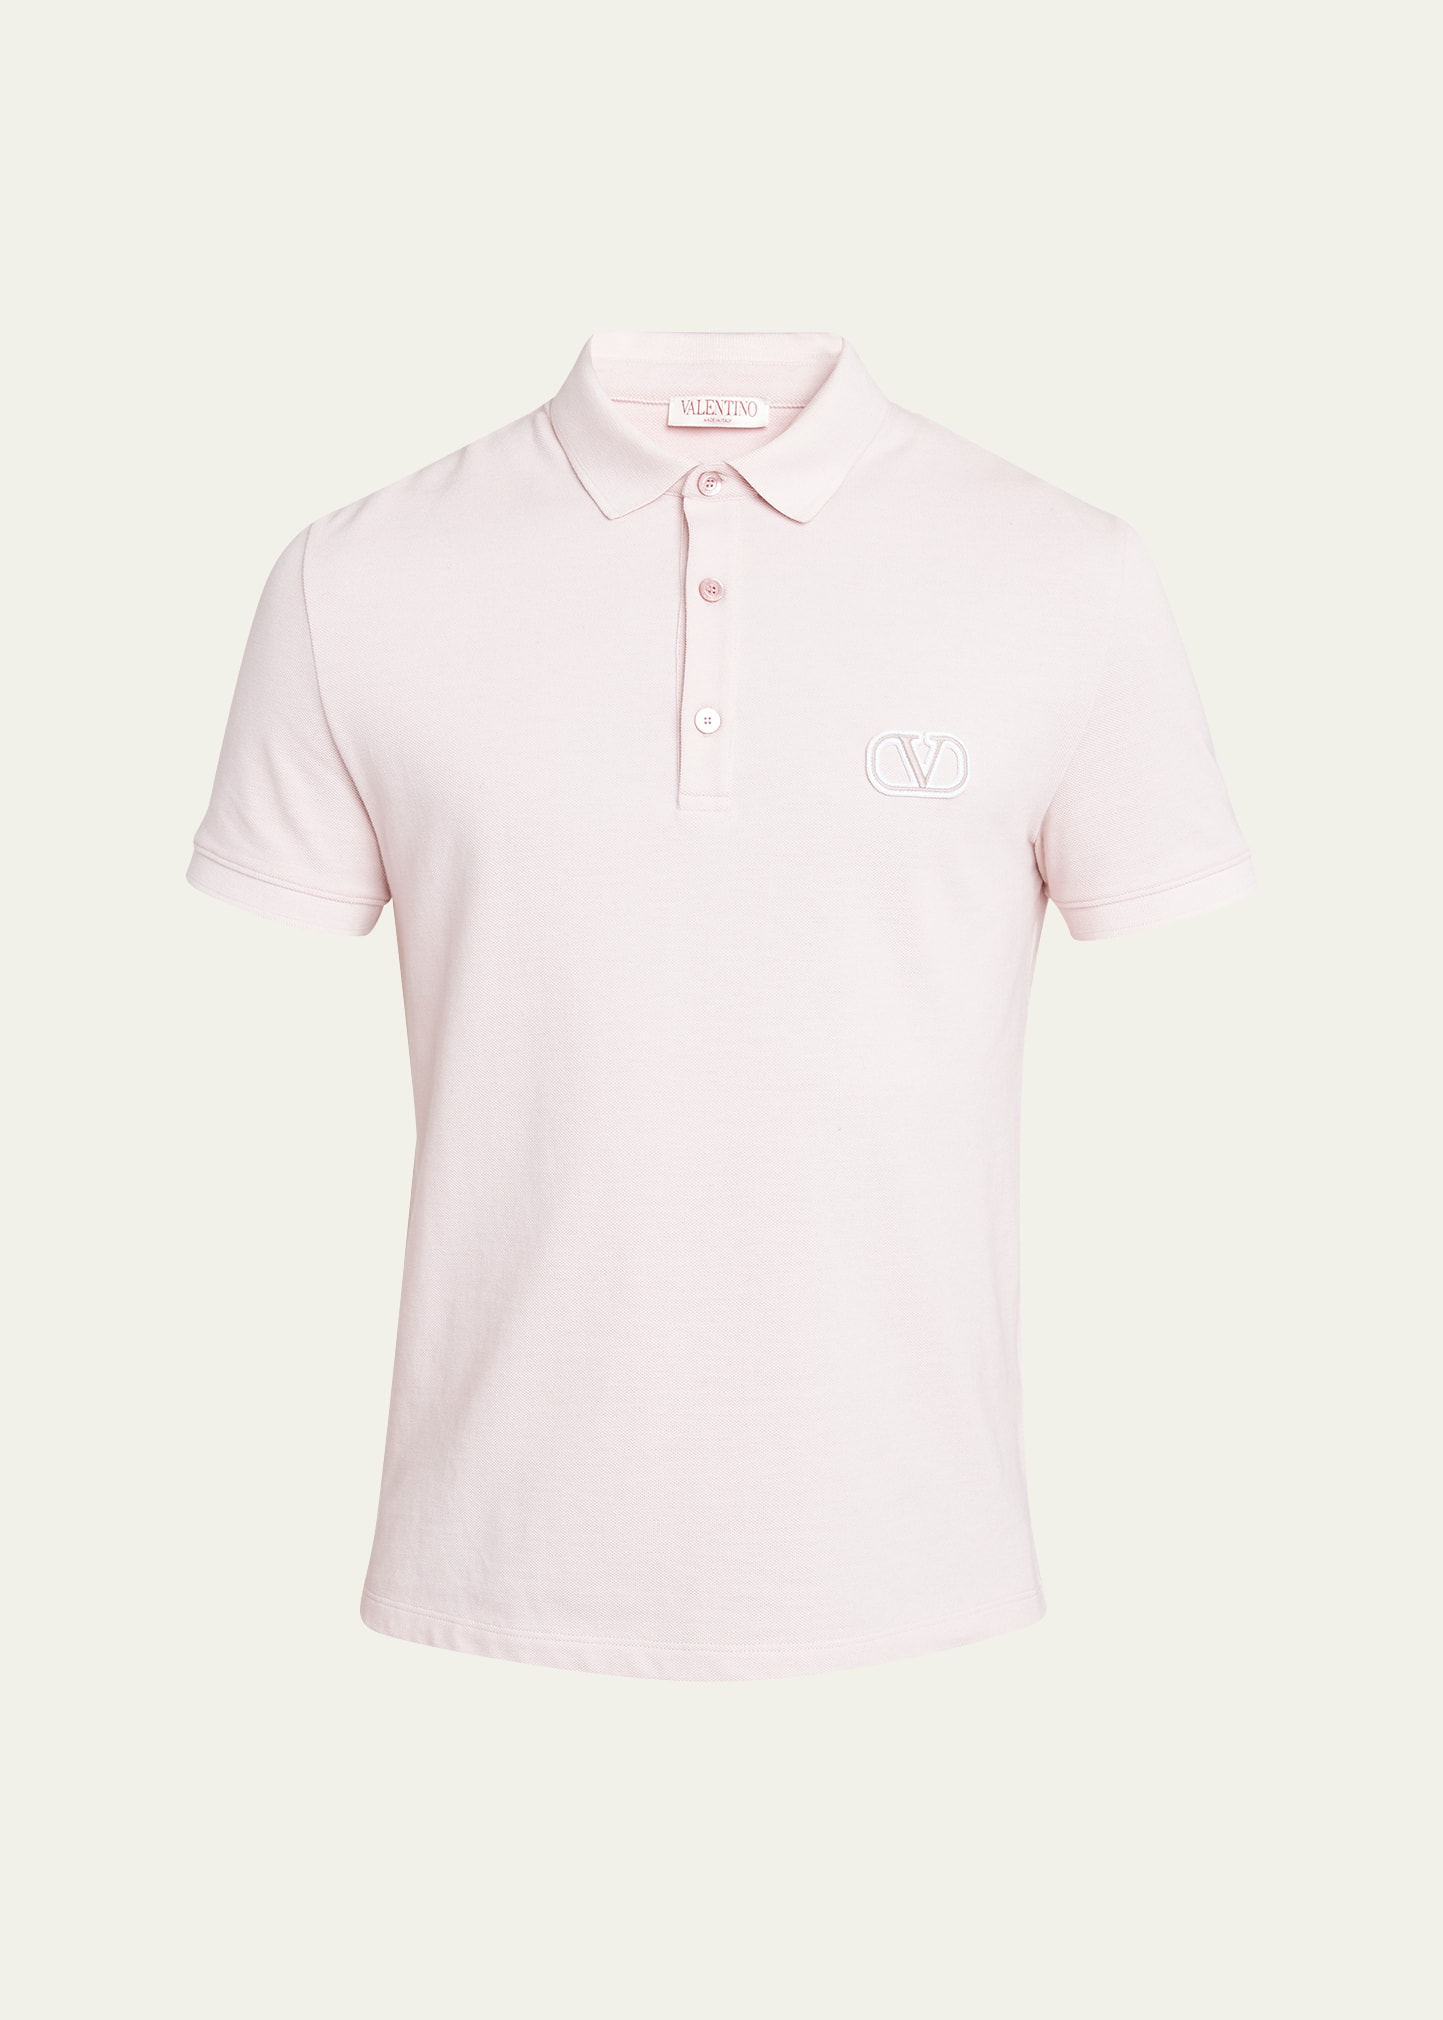 Valentino Men's Vlogo Jersey Polo Shirt In Pink